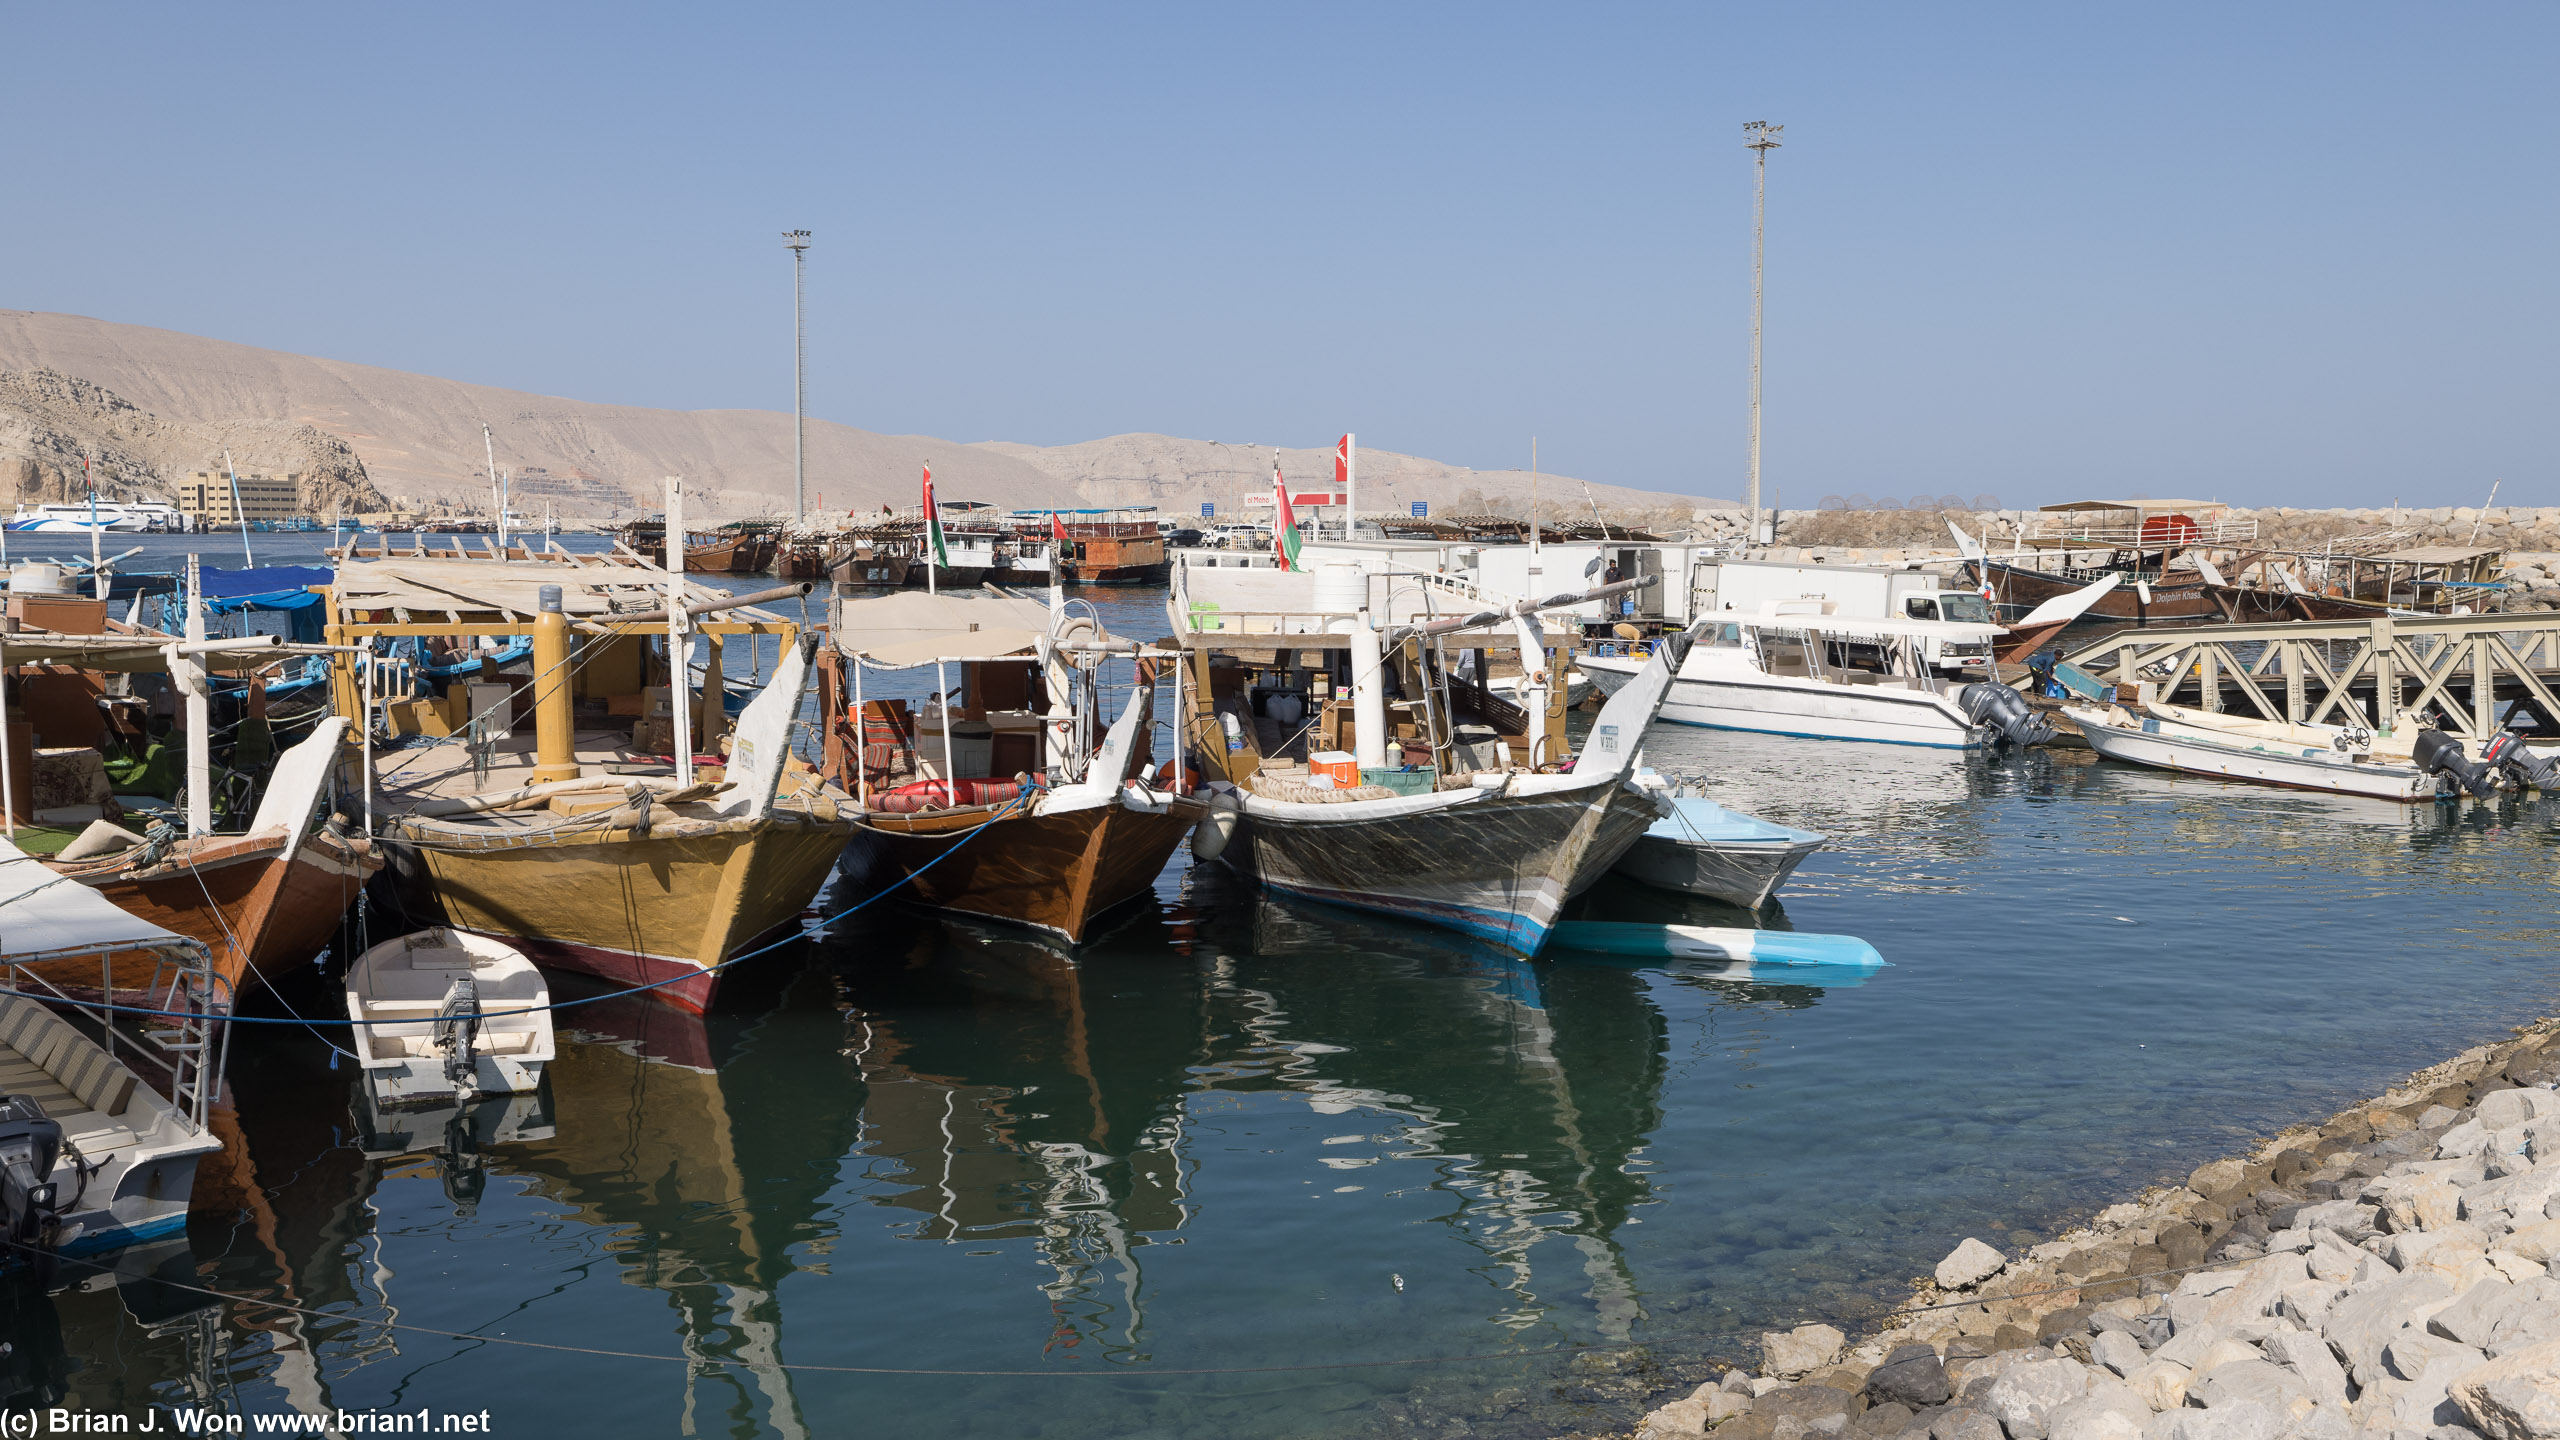 Dhows lined up at the port of Khasab.